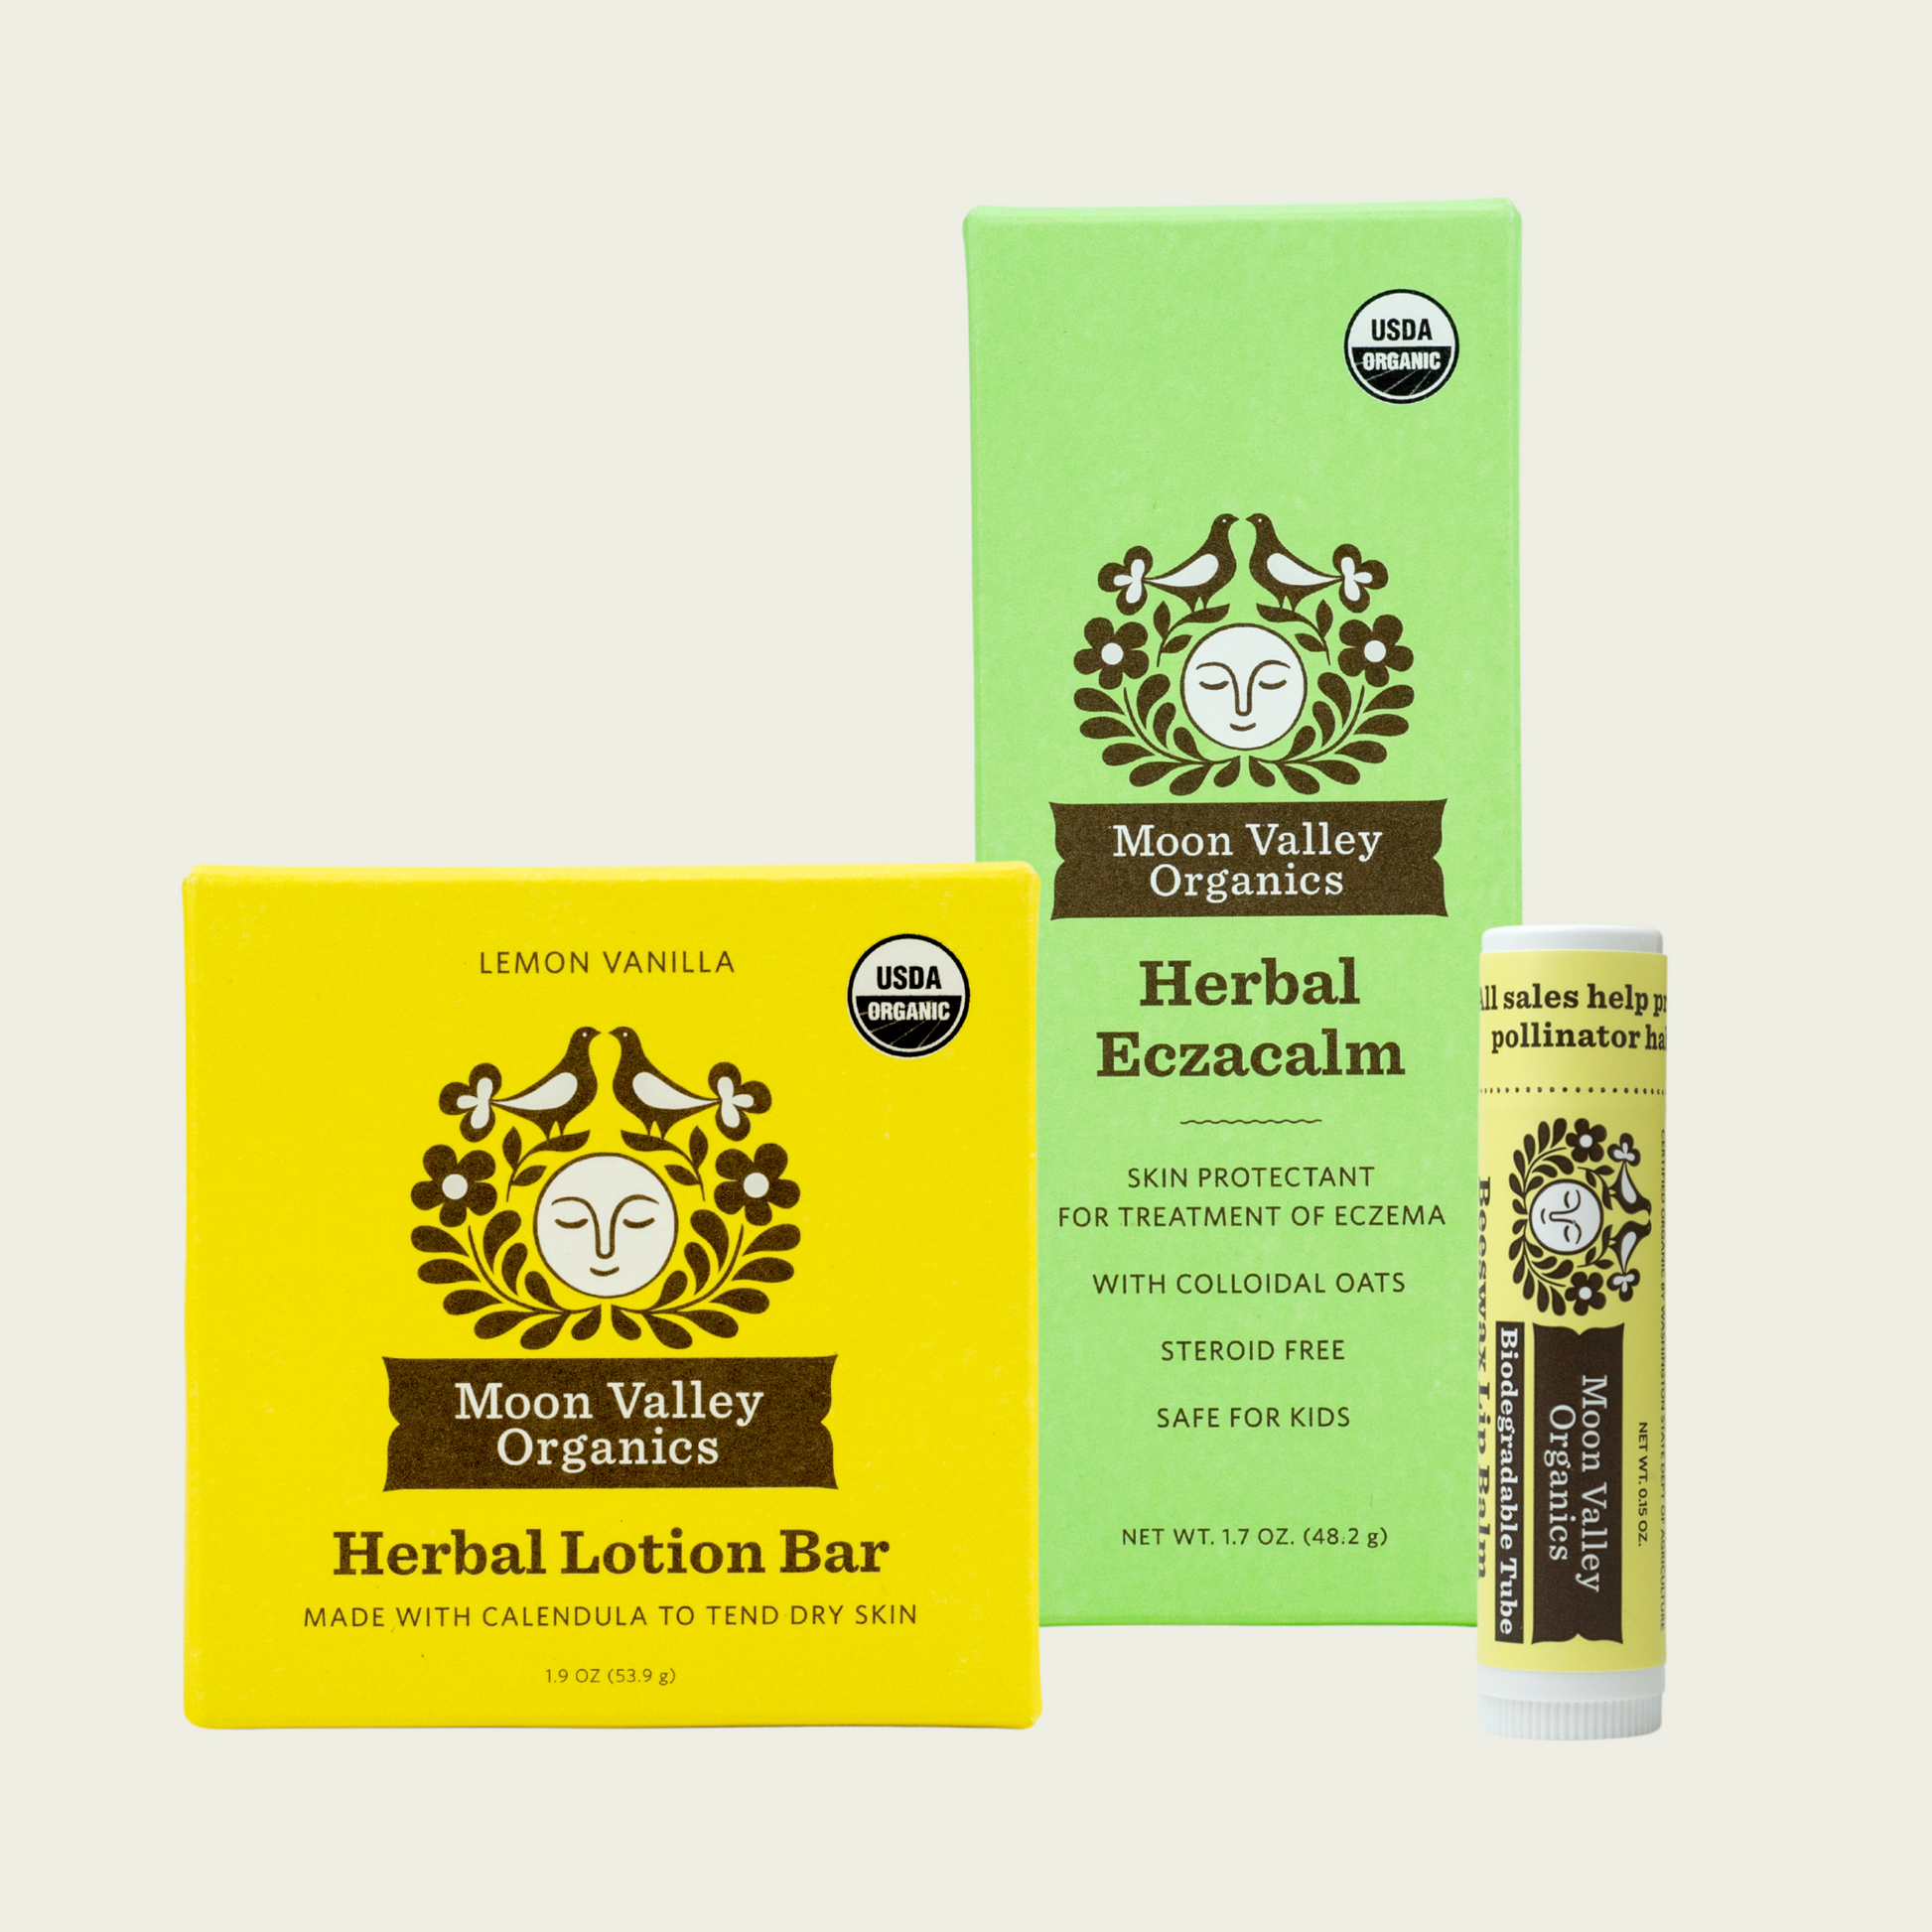 Moon Valley Organics Natural Body Collection Herbal Eczacalm with Lip Balm and Lotion Bar Front Boxes